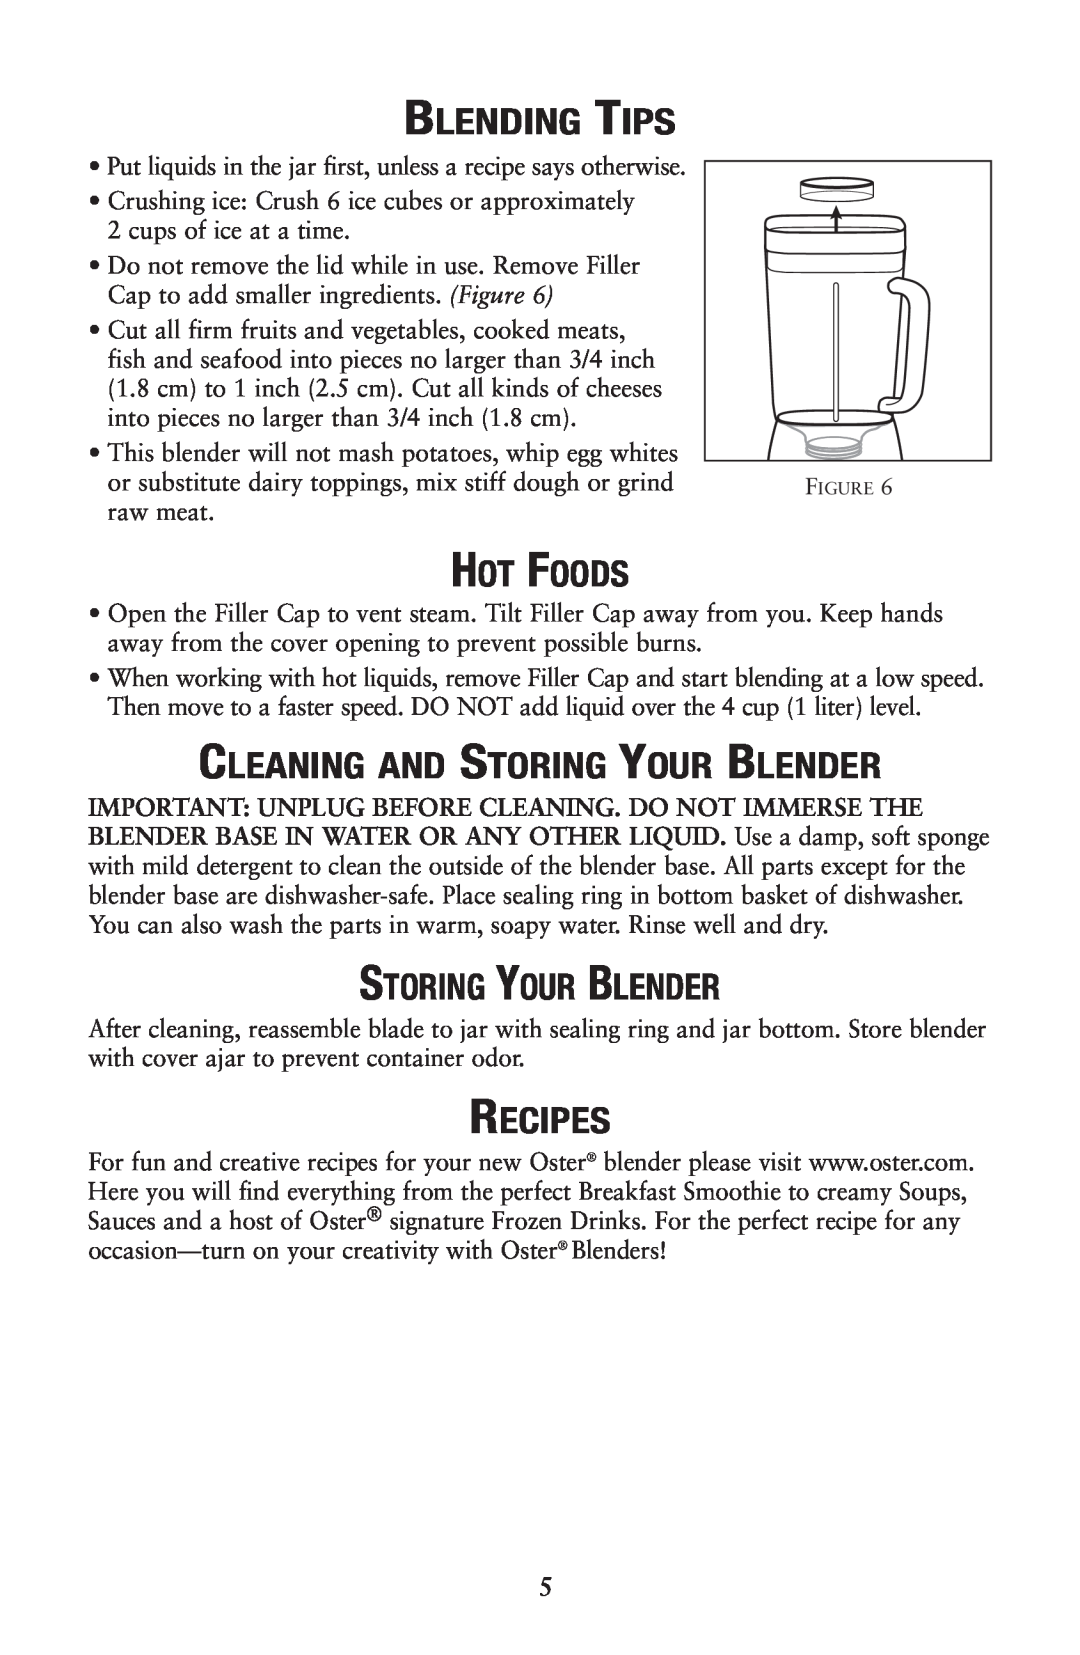 Oster 133086 user manual Blending Tips, Hot Foods, Cleaning And Storing Your Blender, Recipes 